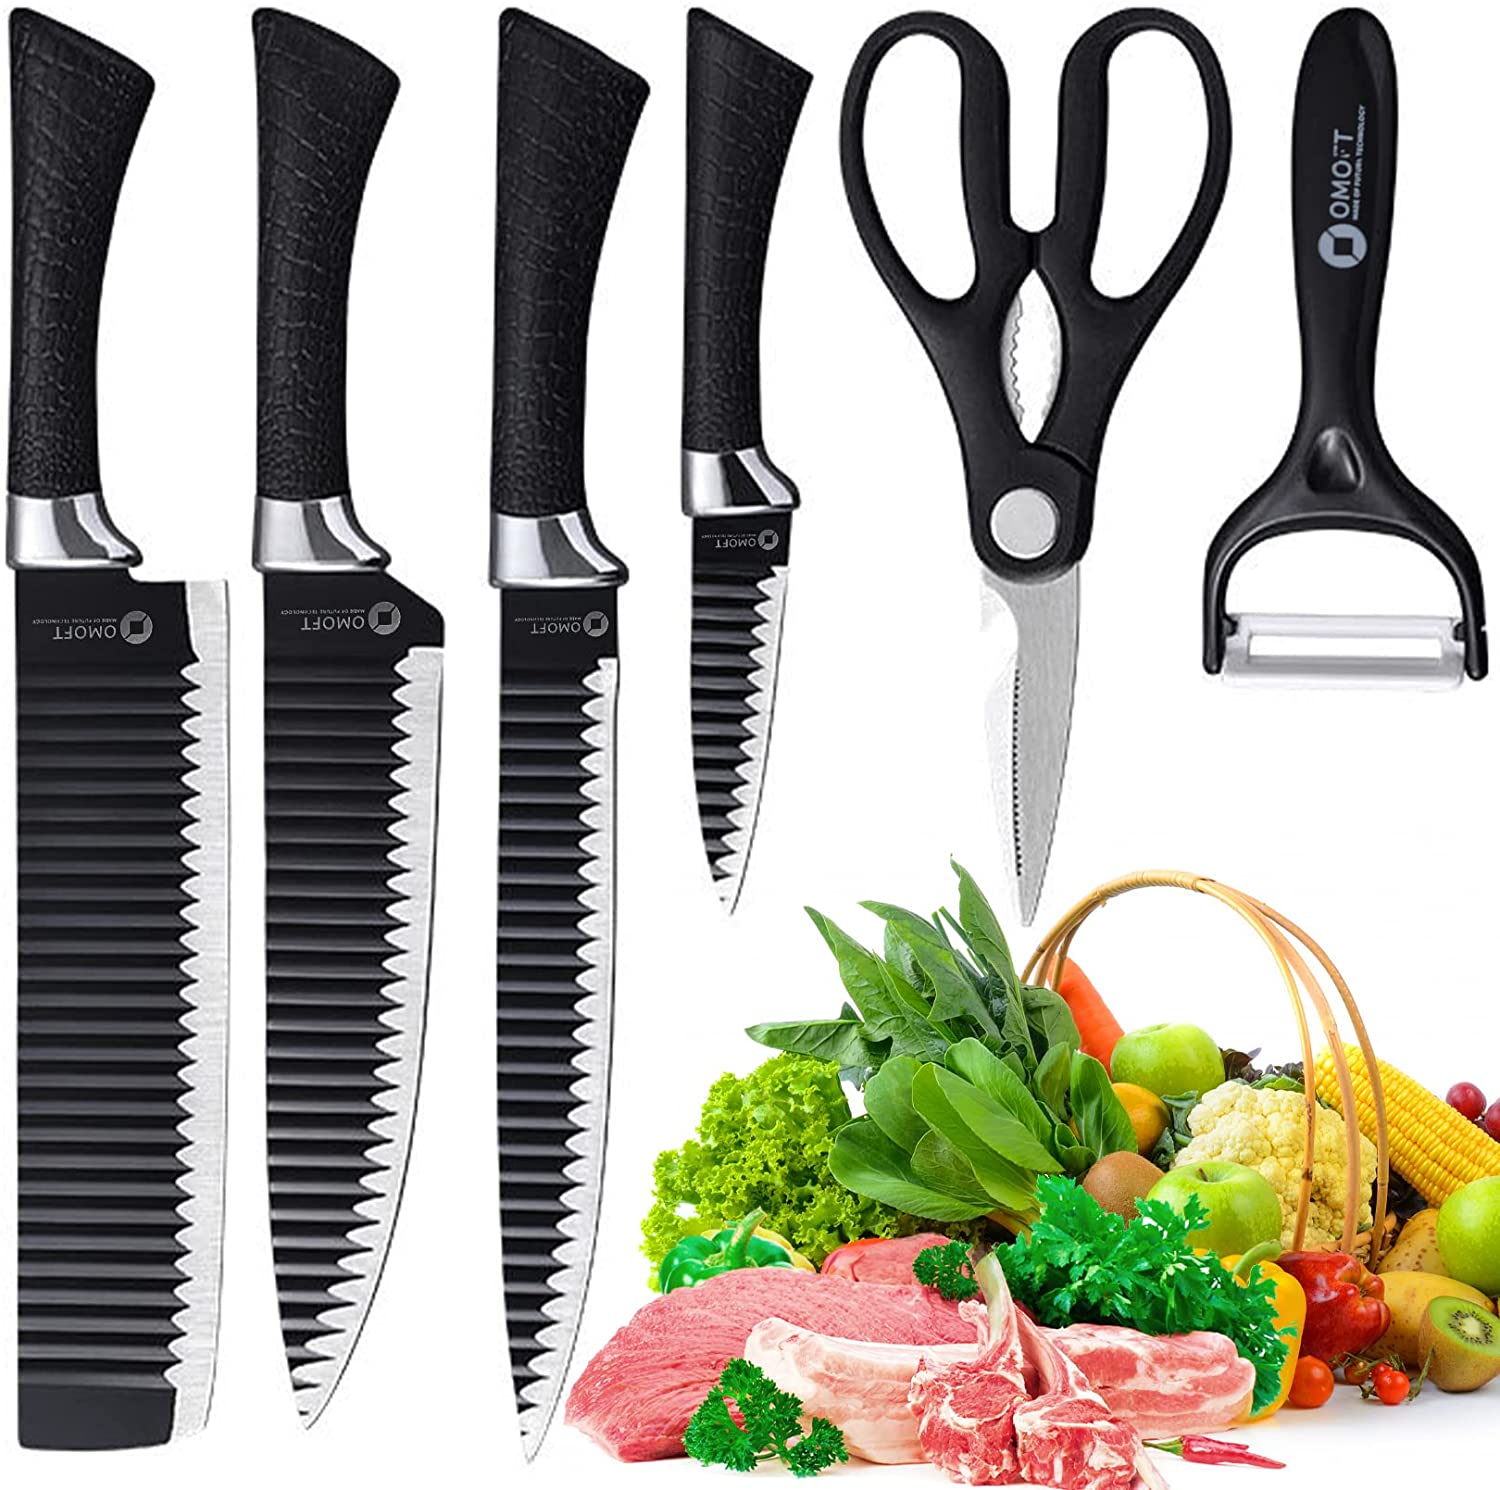 6 Pcs Kitchen Knife Knives Set Professional Sharp Stainless Steel Chef tools includes Steak small Cleaver Carving Knife Paring Knife Scissor German type Ceramic Peeler "meat cutter" butcher